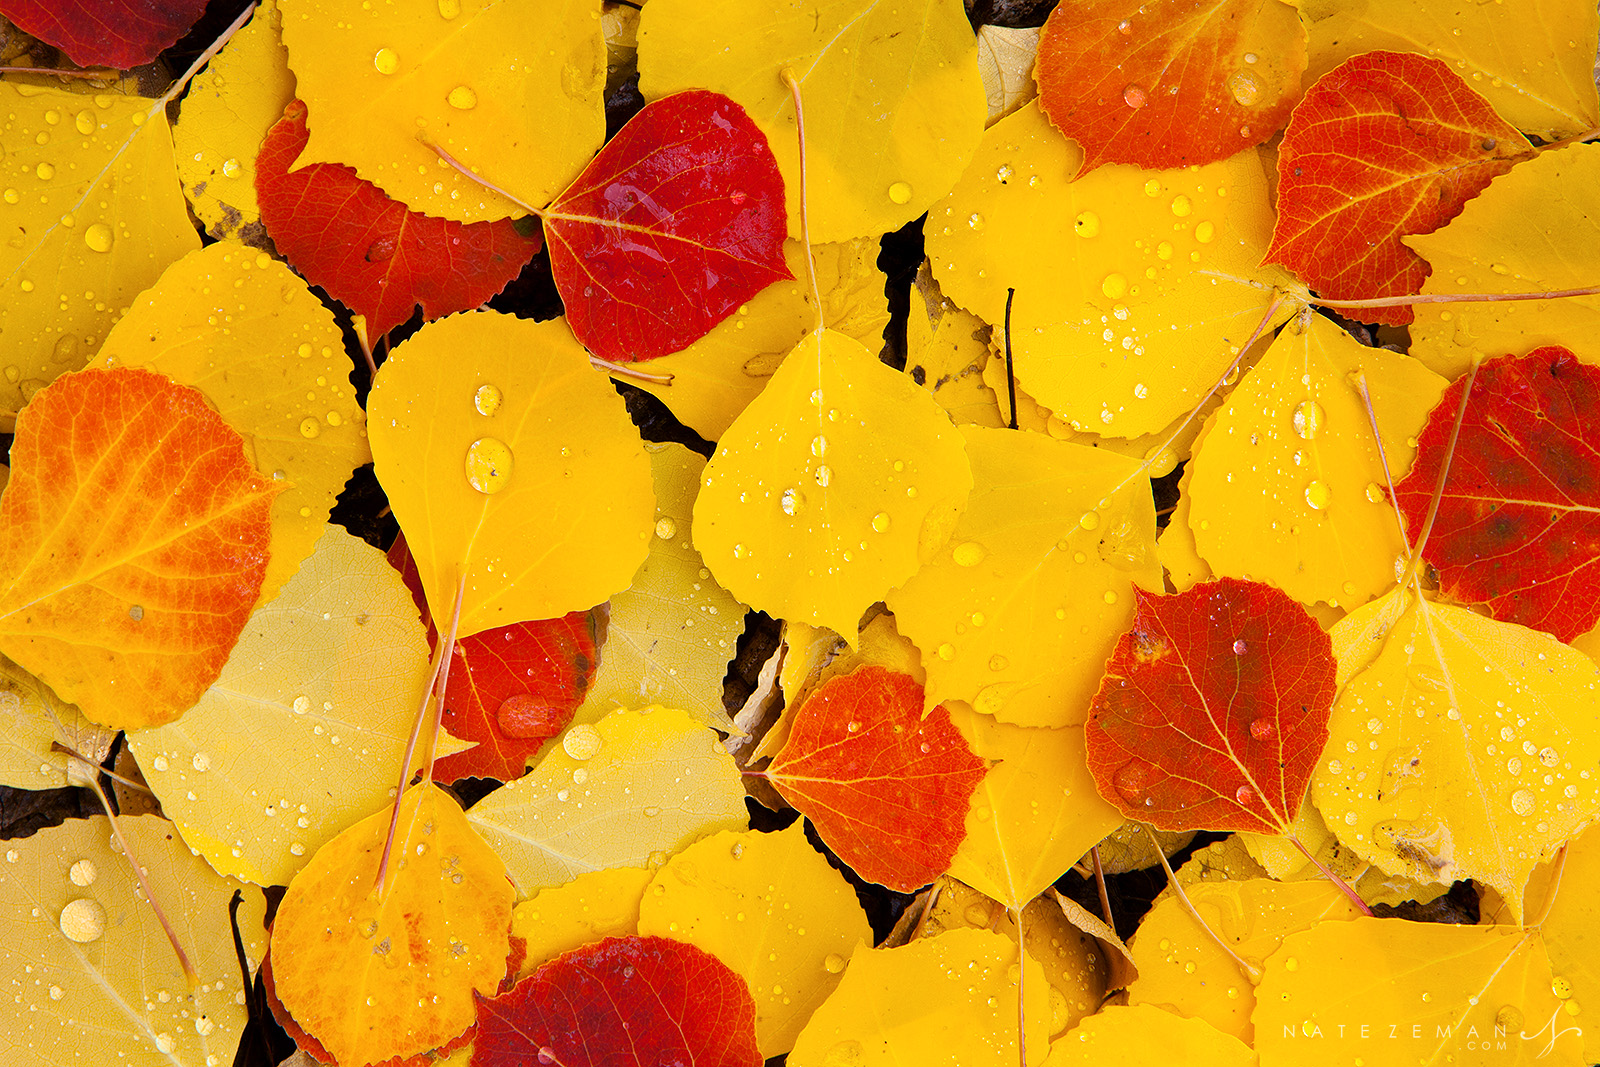 Droplets of water from a recent rainfall sit atop a blanket&nbsp;of vibrantly colored aspen leaves.&nbsp;Purchase Prints and...